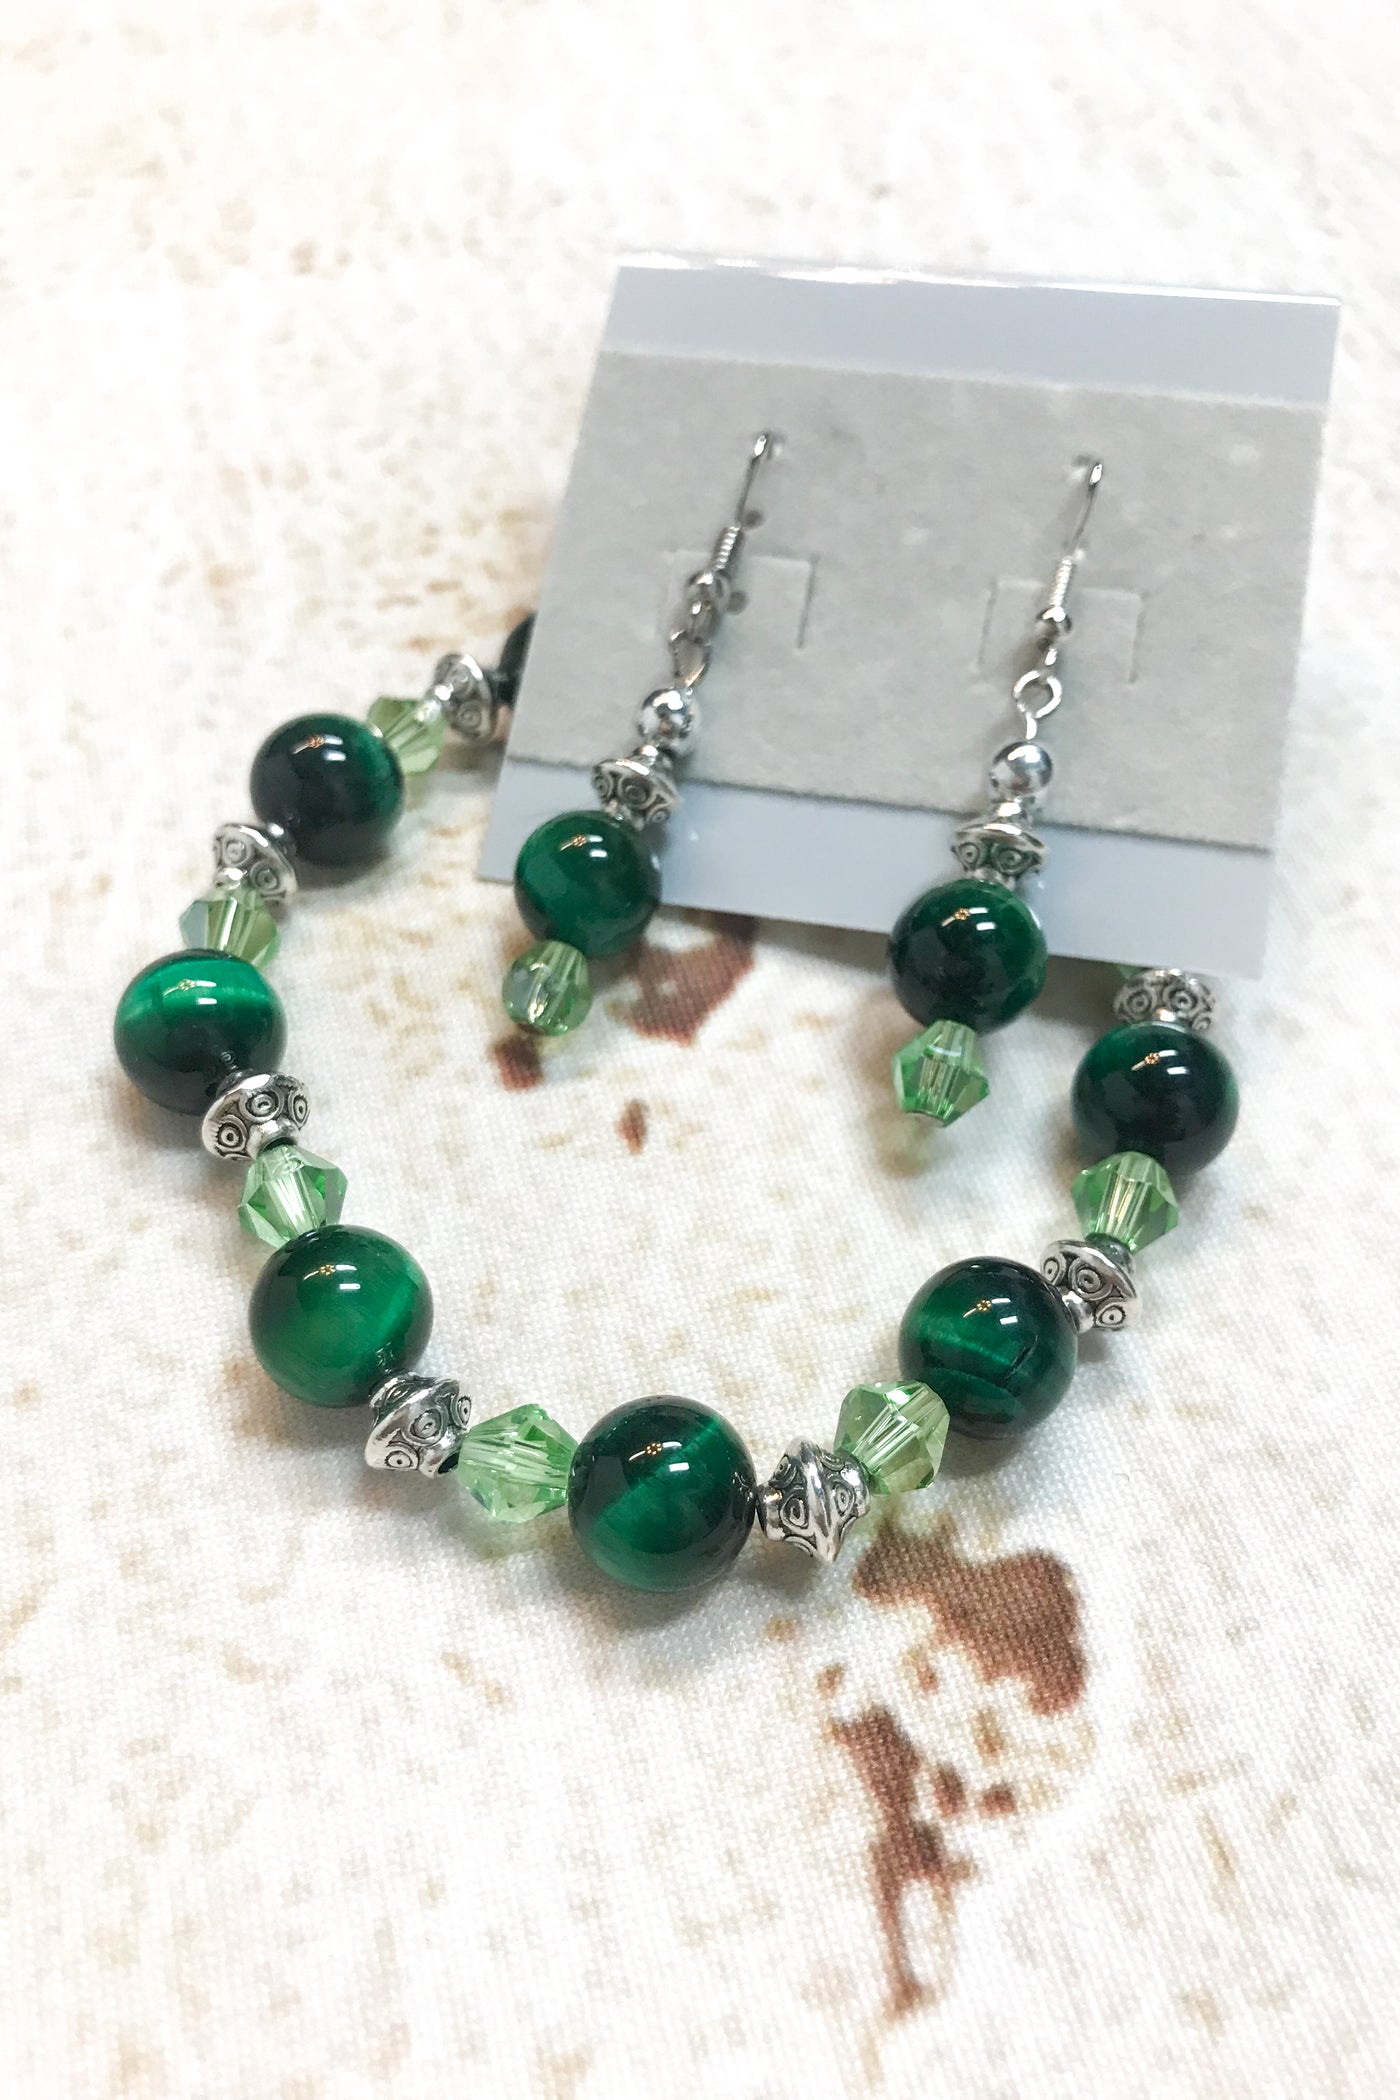 Green Tiger Eye Gemstone Earrings and Bracelet Set by Dazzled by Donna - Melissa Jean Boutique